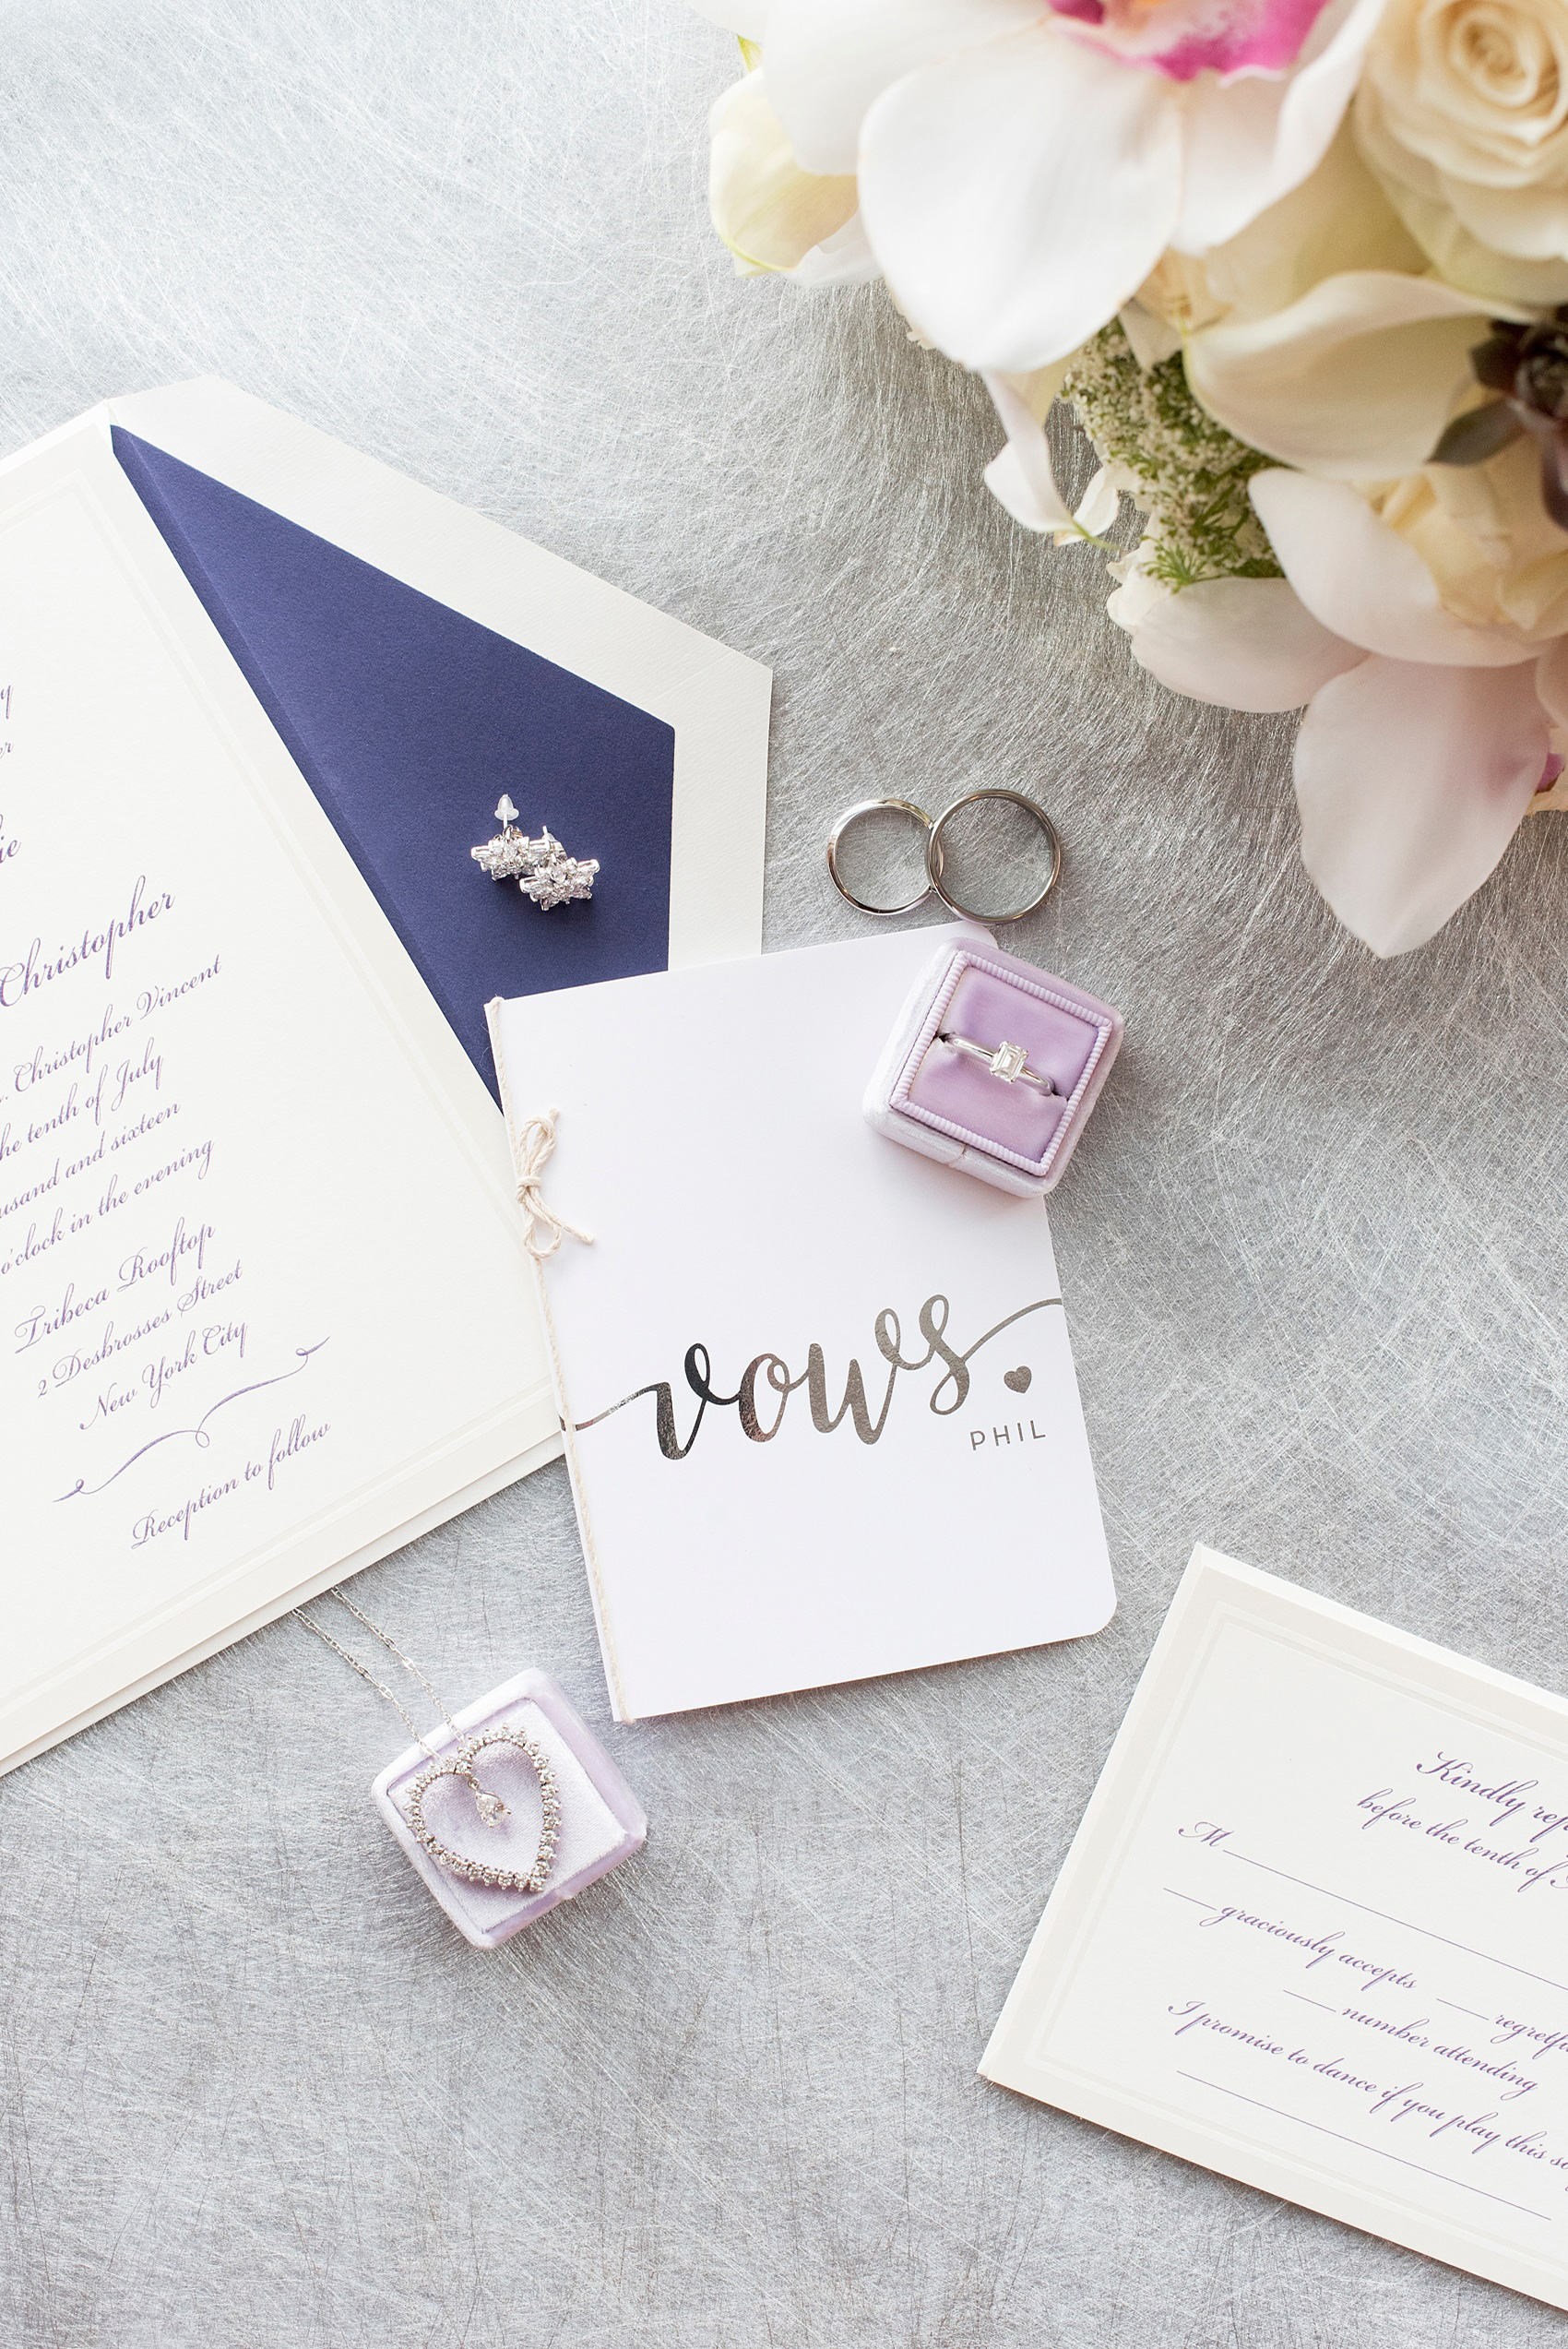 Mikkel Paige Photography photos of a NYC wedding at Tribeca Rooftop. Image of the Mrs. Box in purple and vows book and invitation.